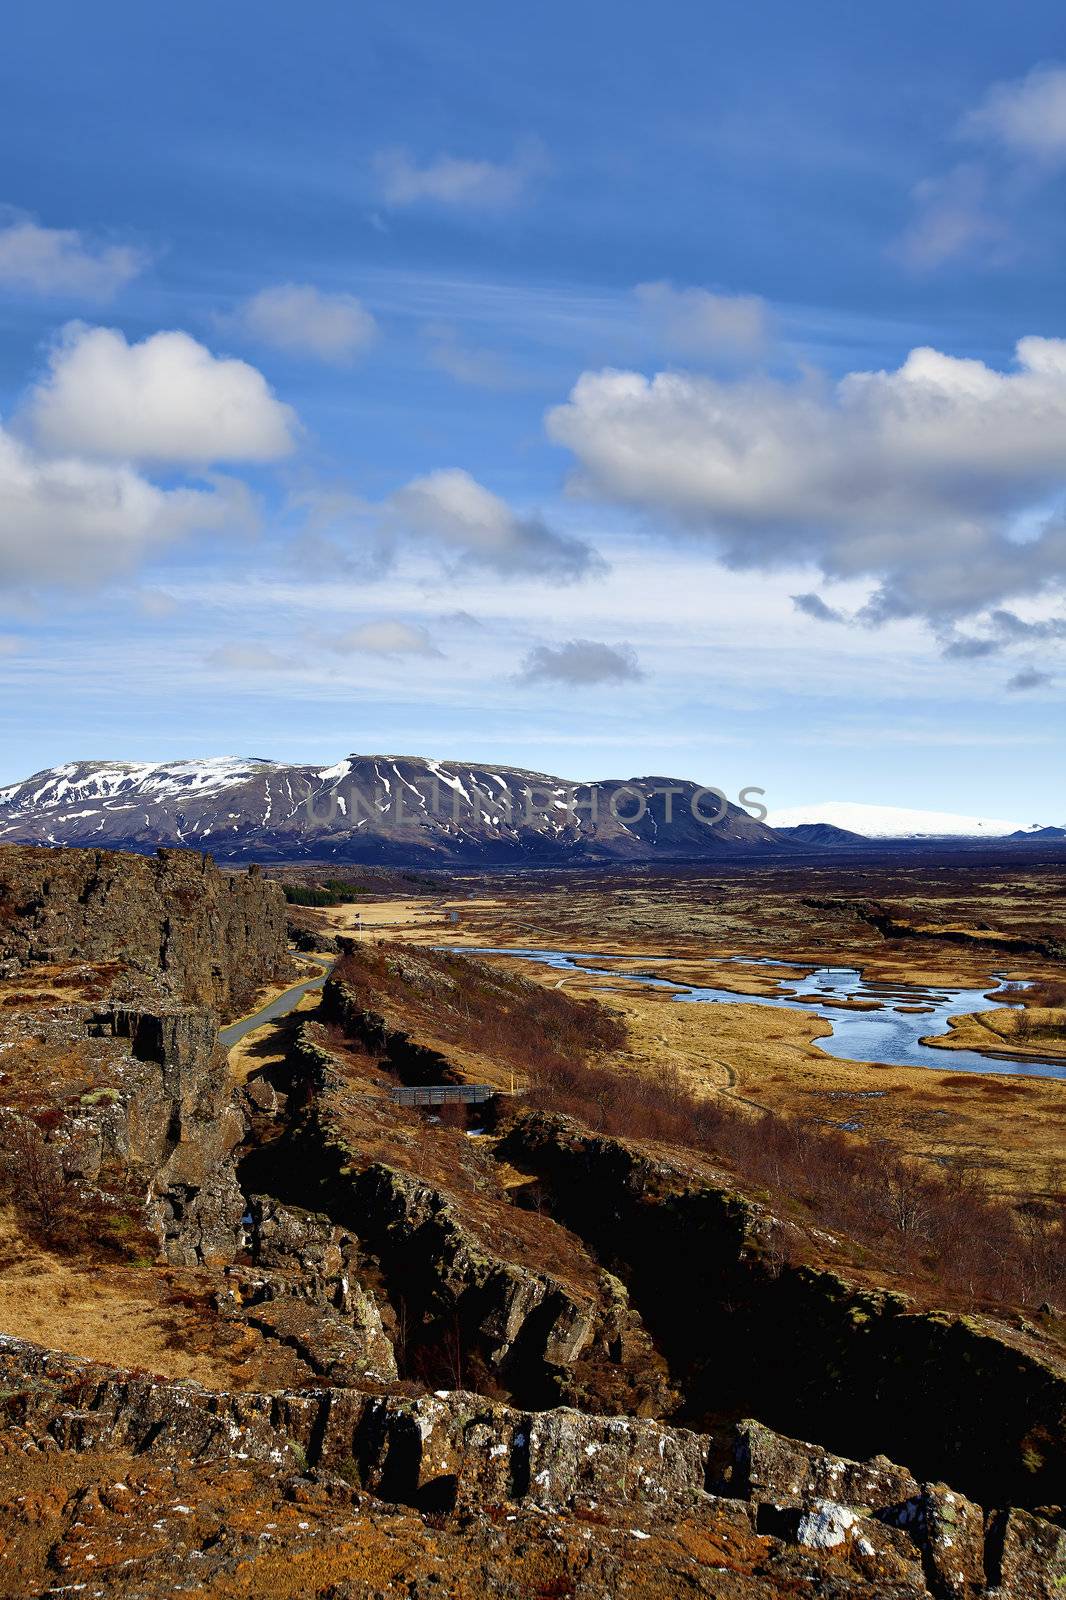 Thingvellir national park is the site of a rift valley that marks the crest of the Mid-Atlantic Ridge